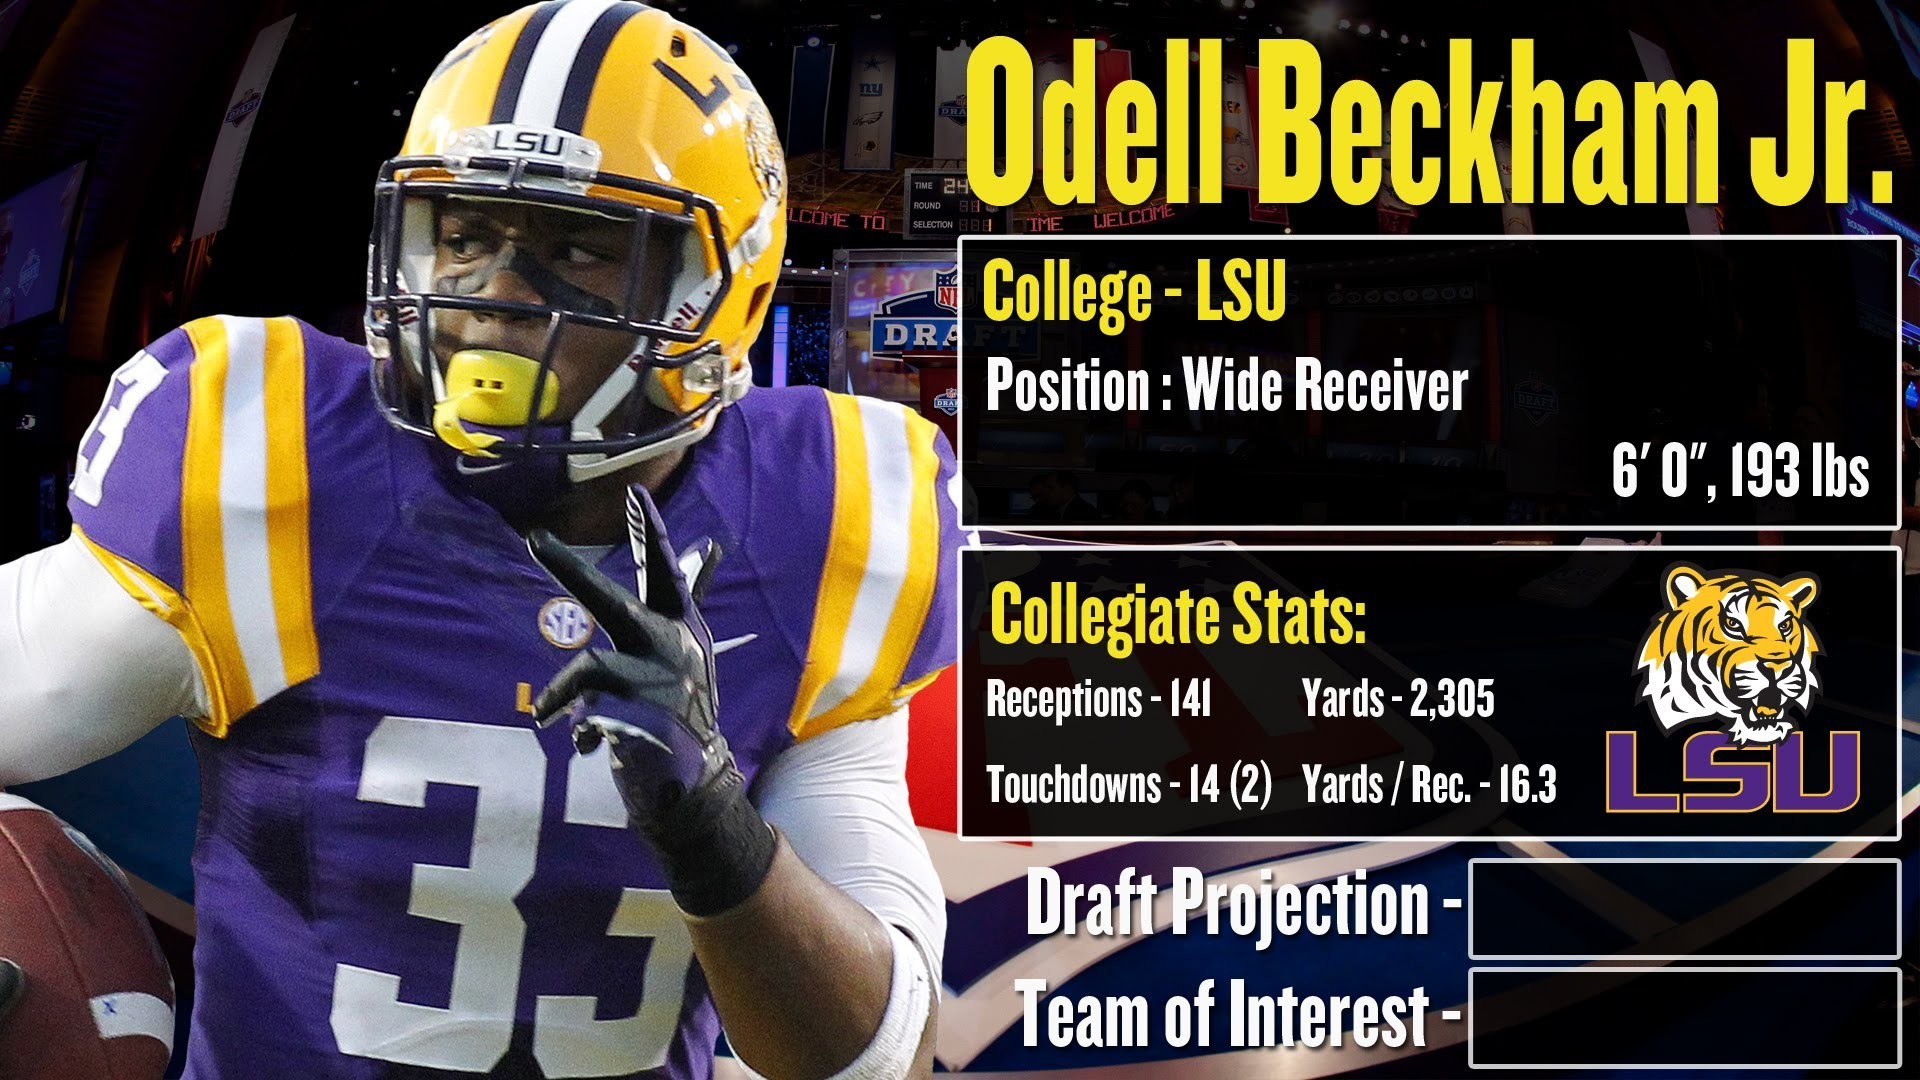 1920x1080 2014 NFL Draft Profile: Odell Beckham Jr. - Strengths and Weaknesses +  Projection! - YouTube